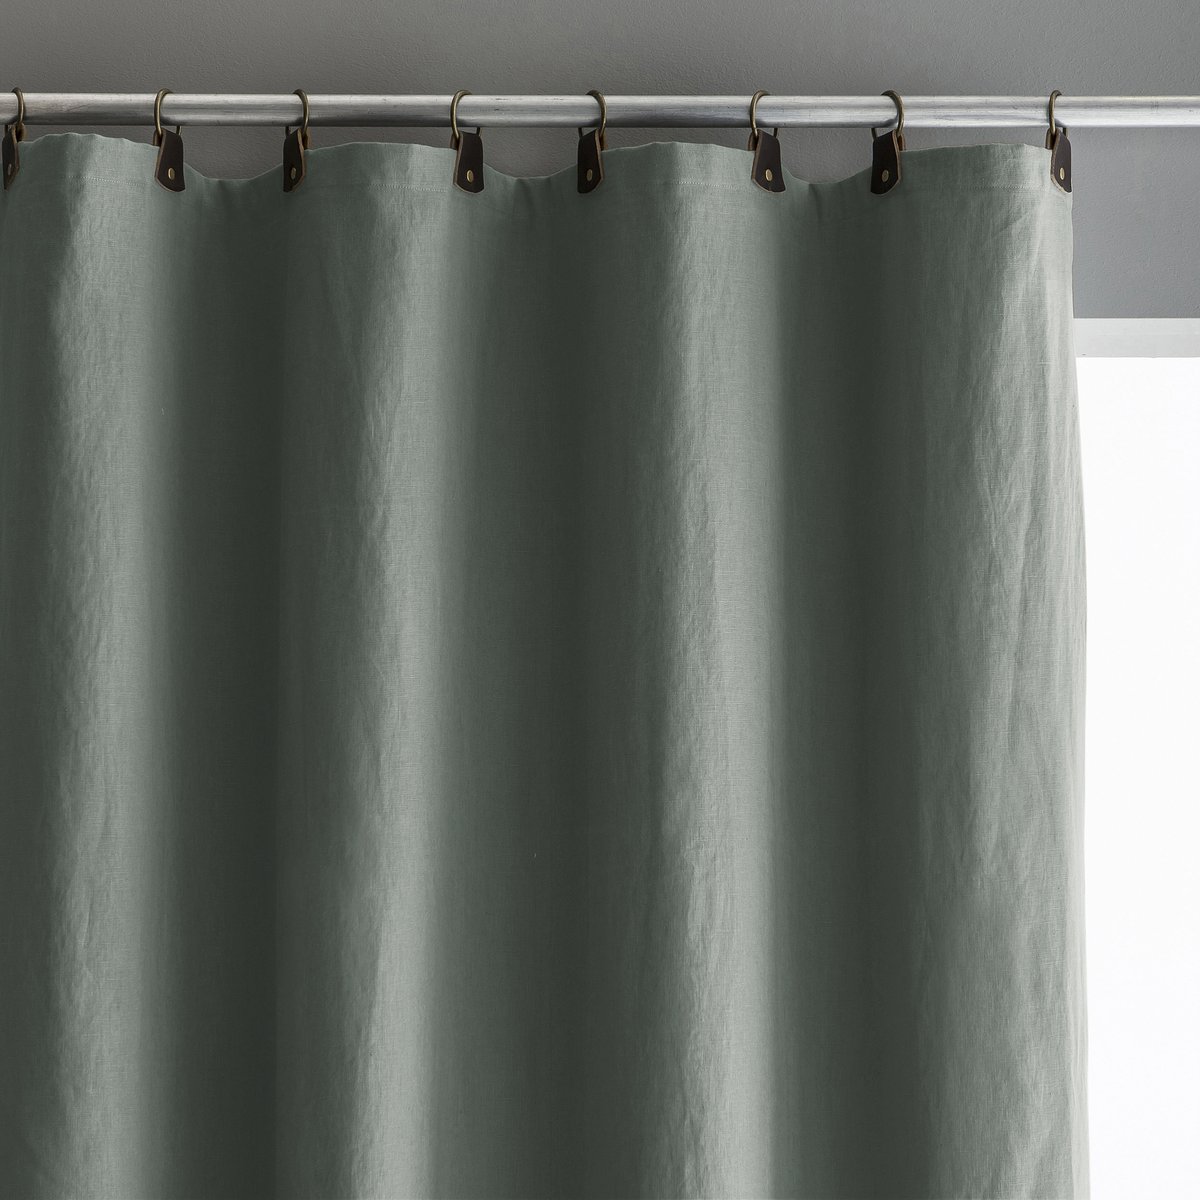 Image of Private Single Linen Lined Blackout Curtain with Leather Tabs